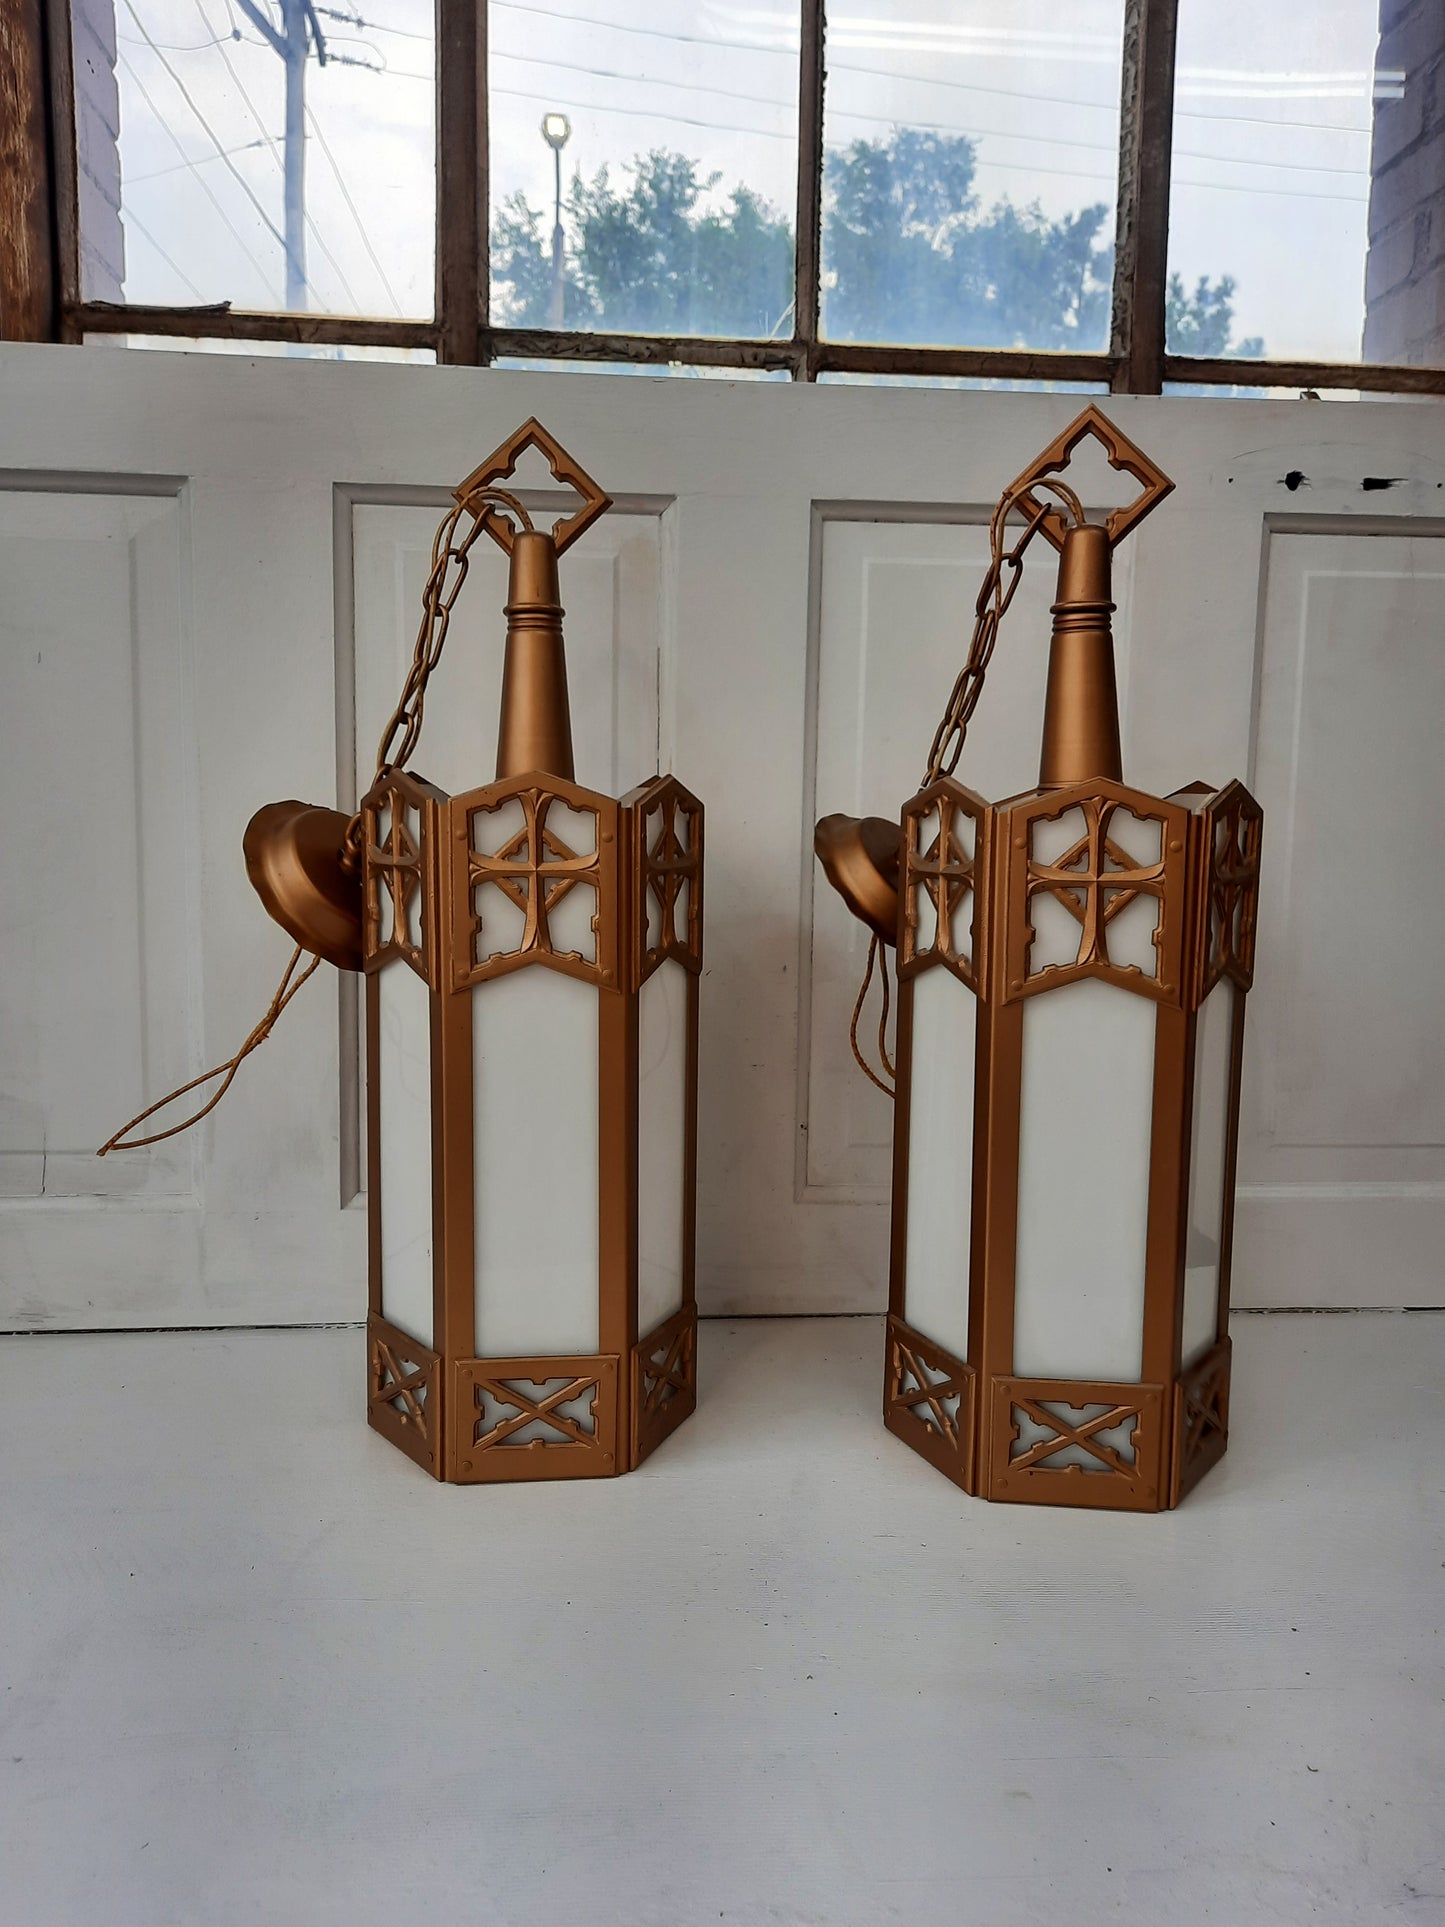 Two Small Vintage Church Pendant Lights with Gothic Style Metal Frames, Gold Vintage Pendant Light